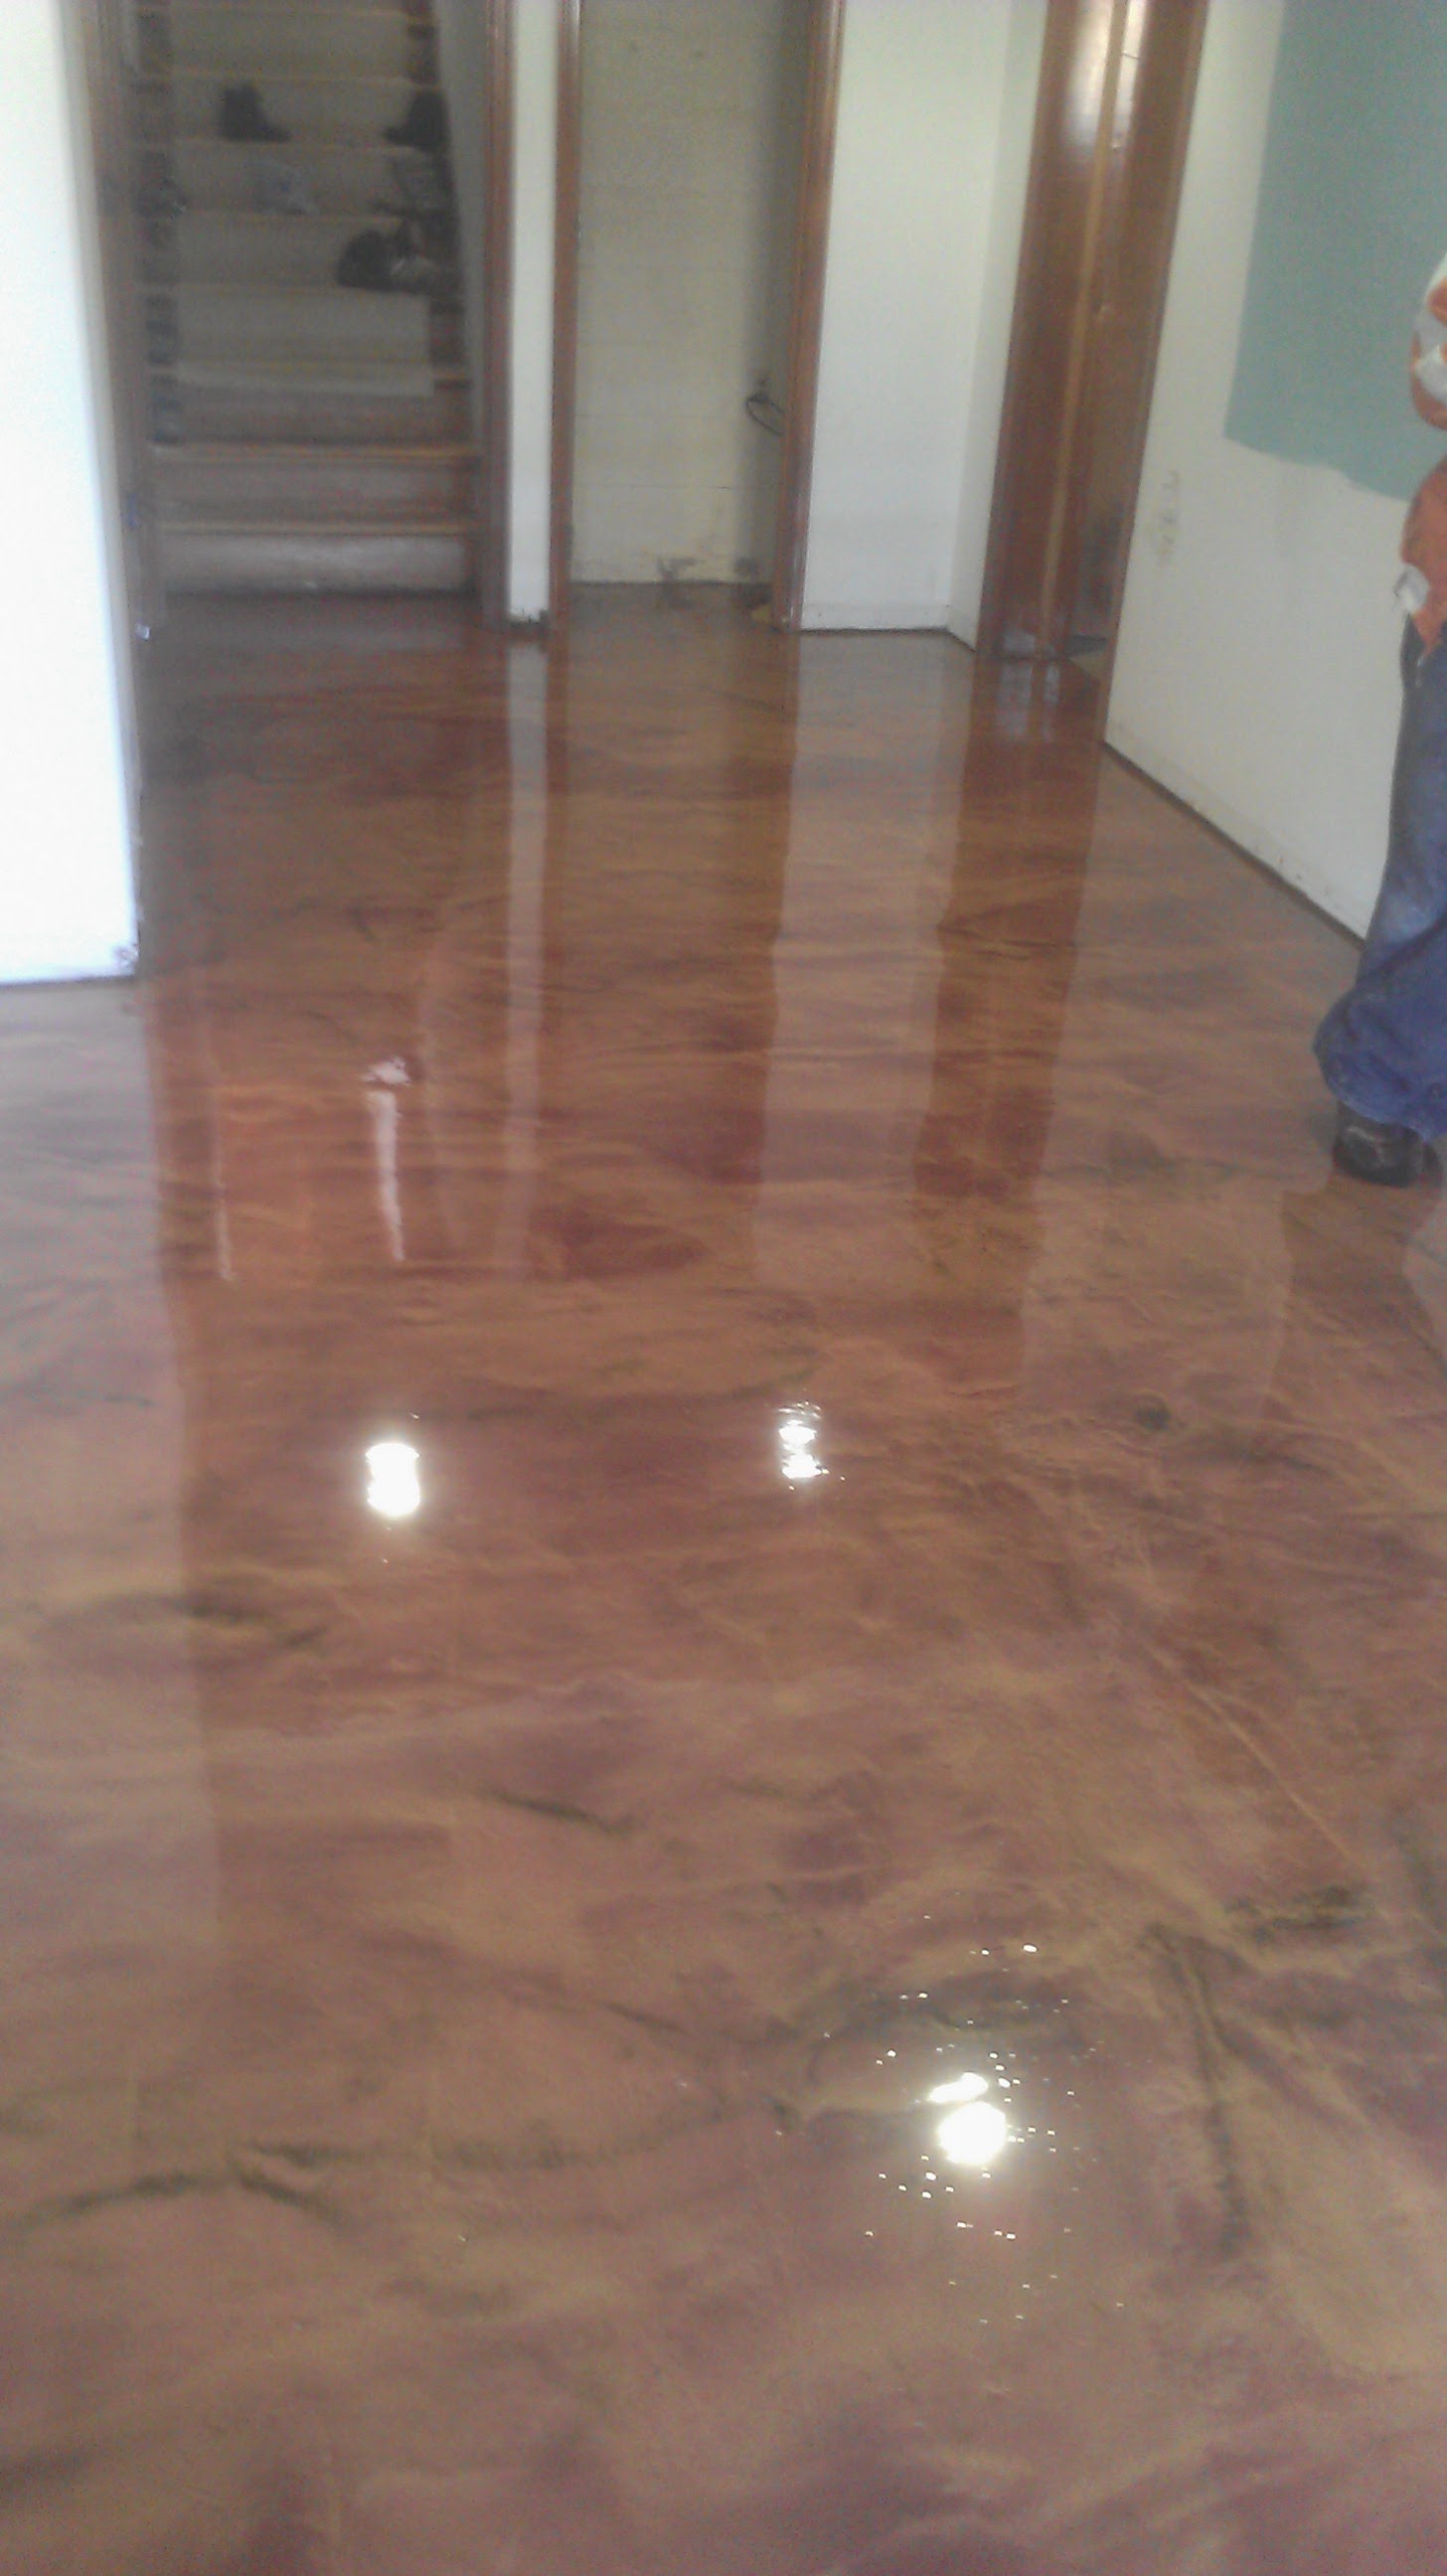 Stained Concrete Columbus, OH | Re-Deck of Central Ohio | Redeck of